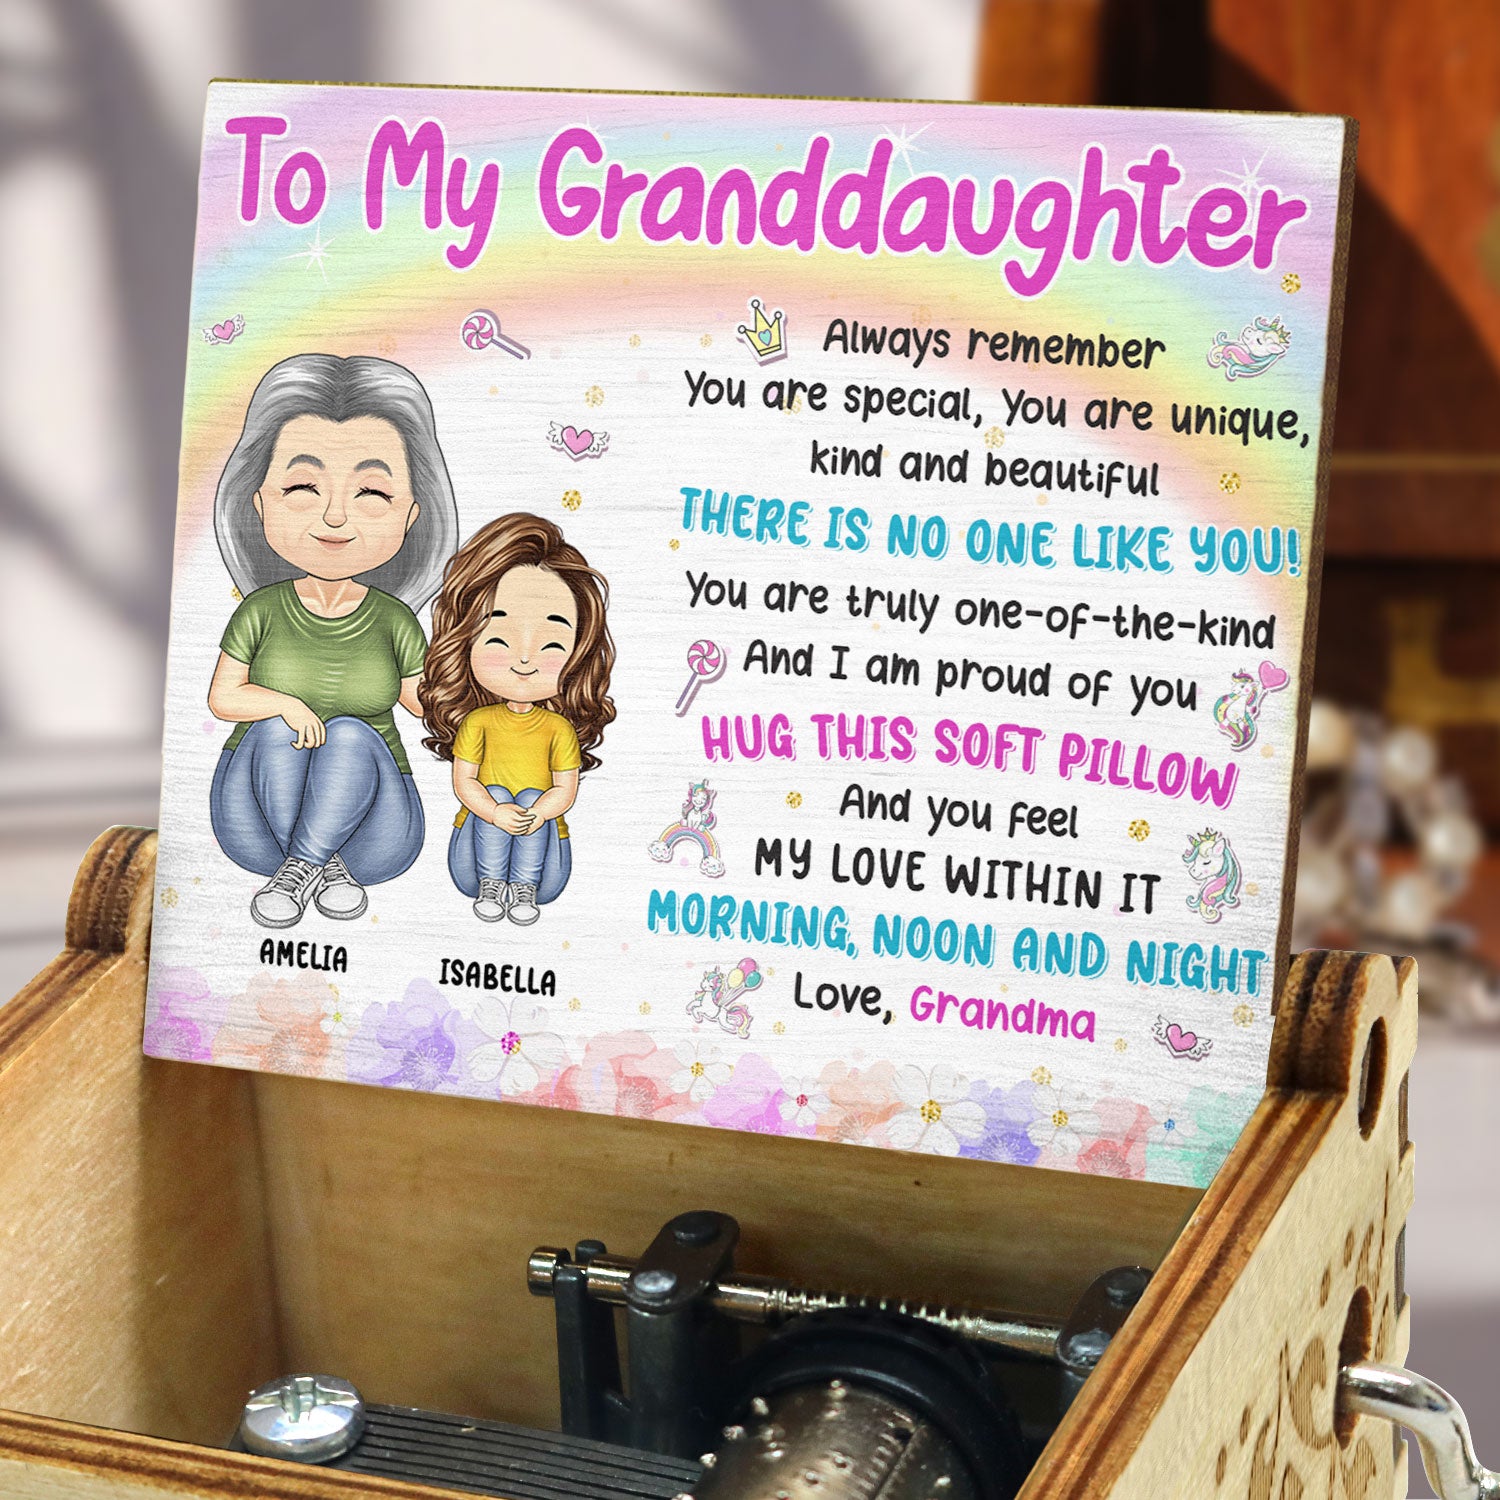 Always Remember You Are Special - Gift For Granddaughter, Grandson, Kids - Personalized Spin Button, Hand Crank Music Box